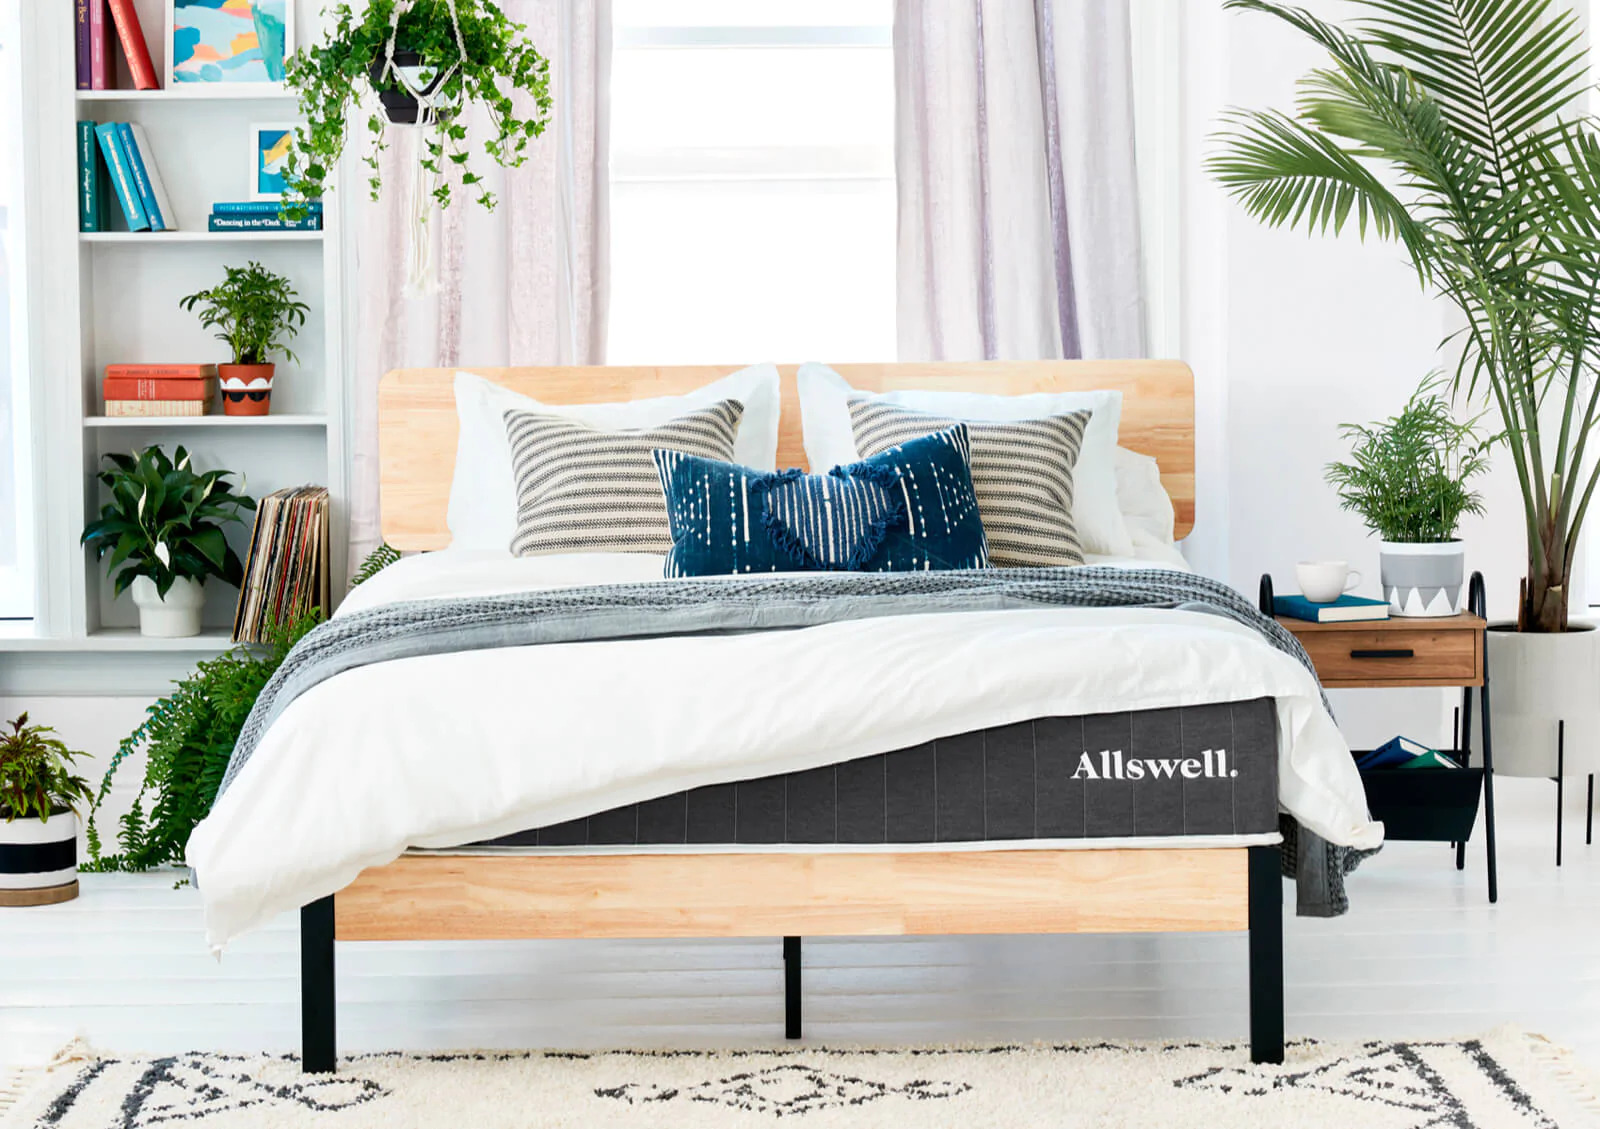 Allswell Mattress, on a wooden bedframe in a bedroom